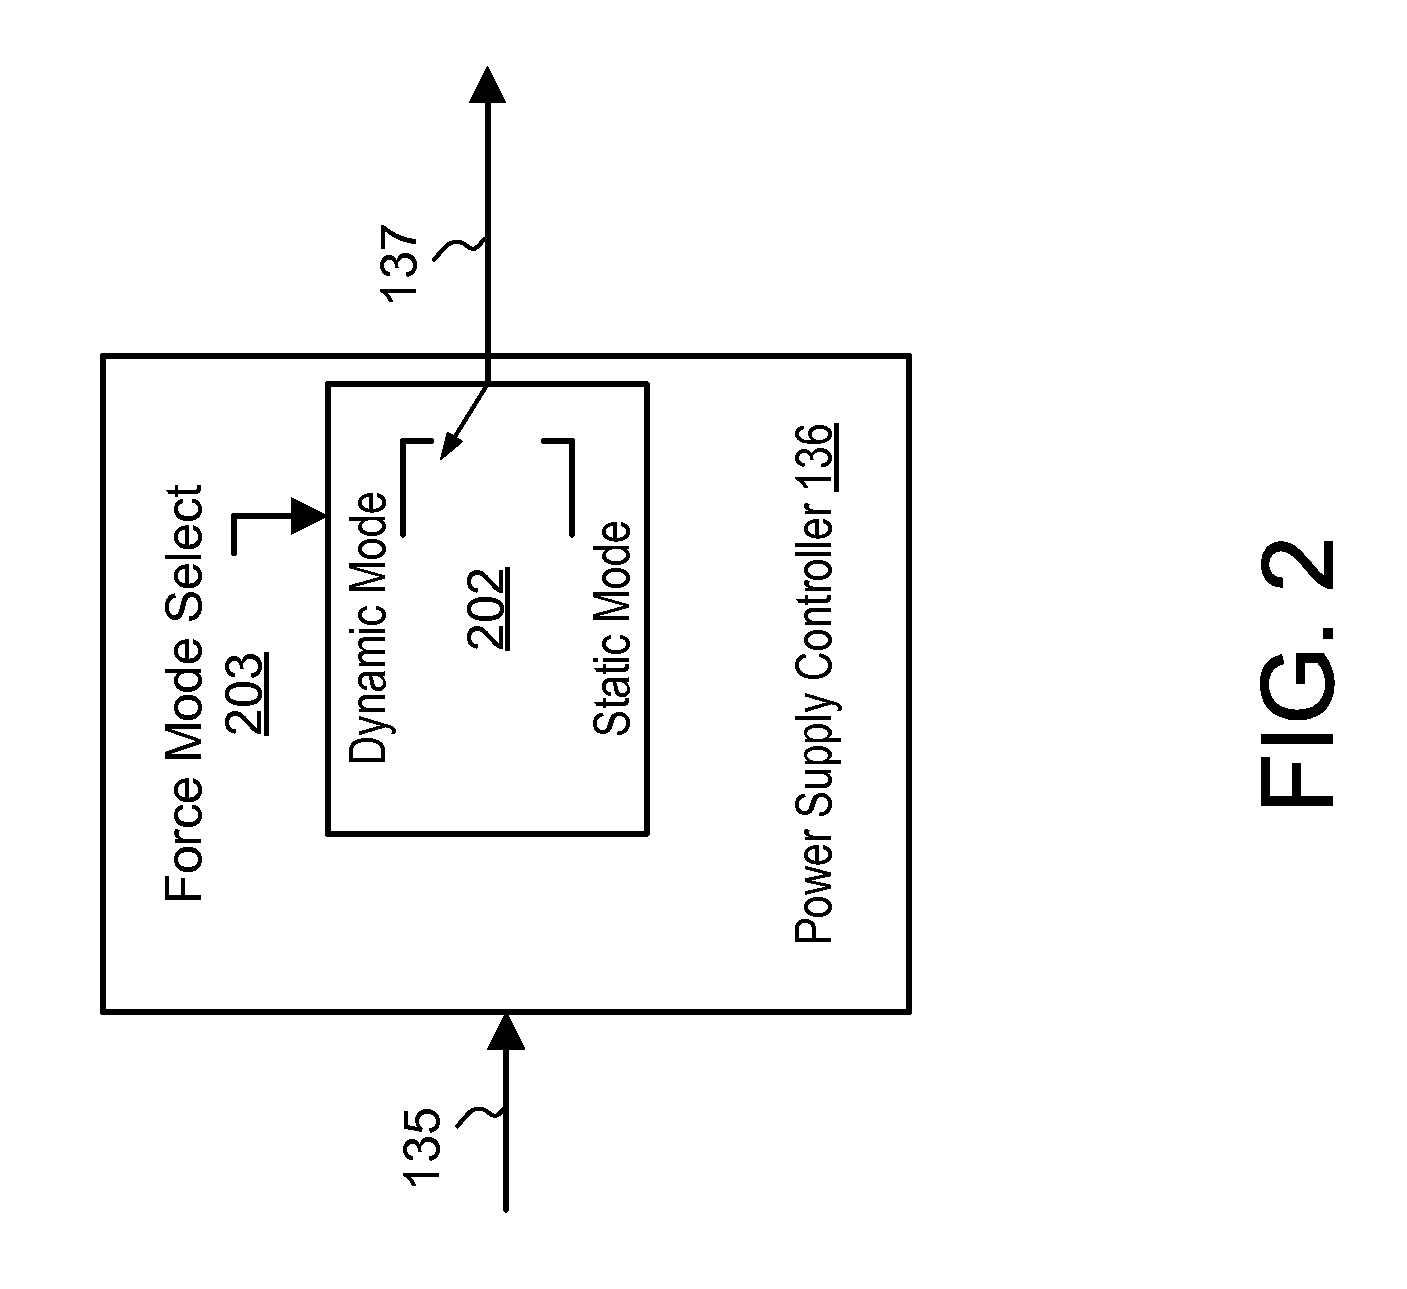 Envelope tracking power amplifier system with delay calibration